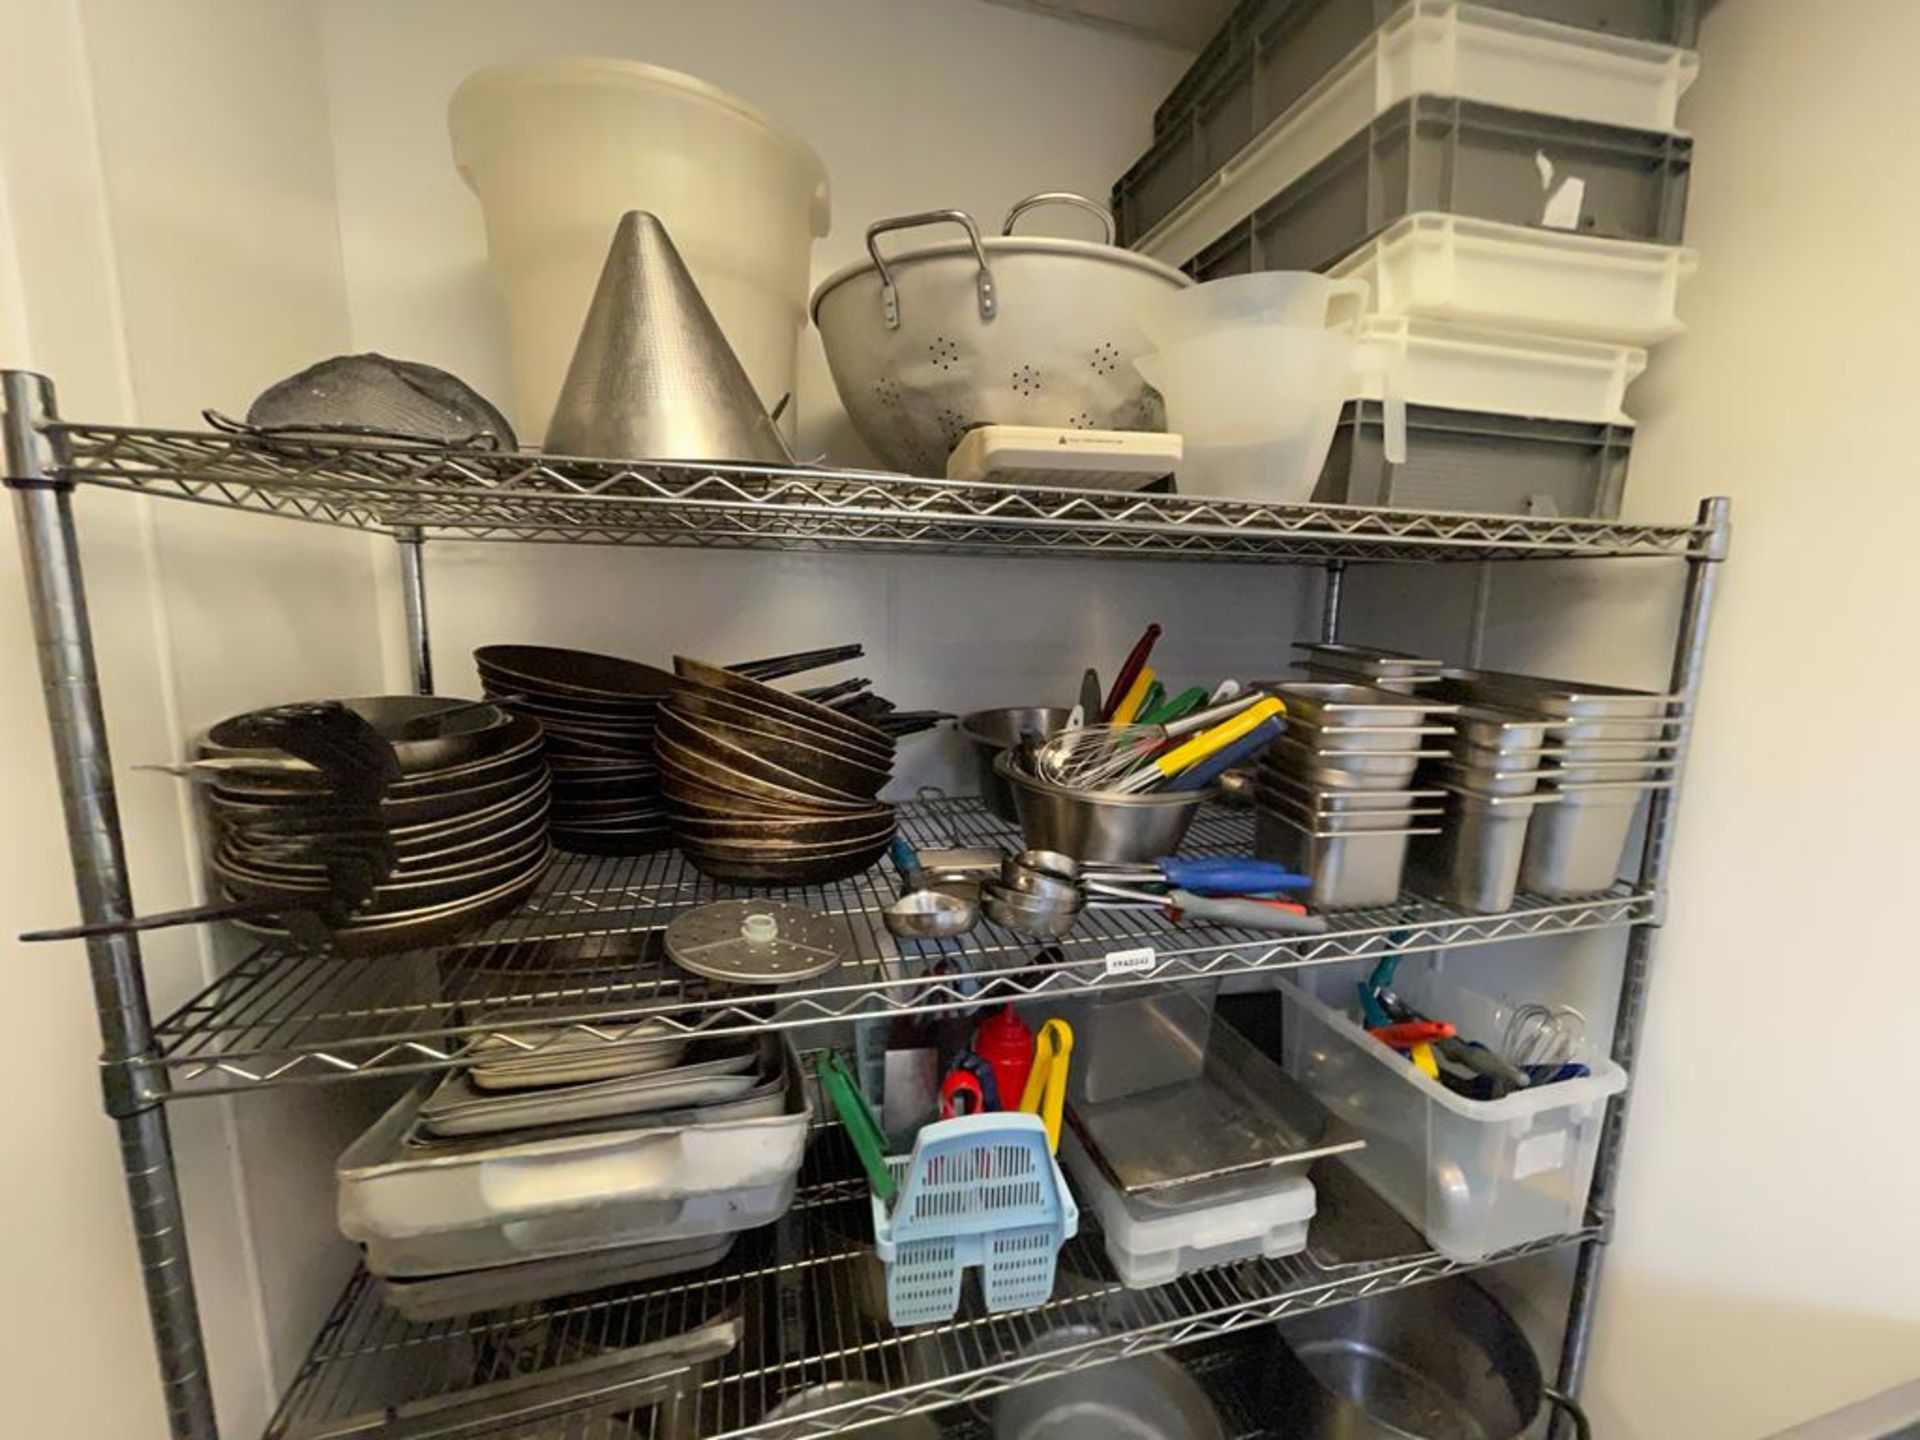 1 x Stainless Steel Shelving Unit With Contents - Contents Include Cooking Pans, Frying Pans, Gastro - Image 4 of 7